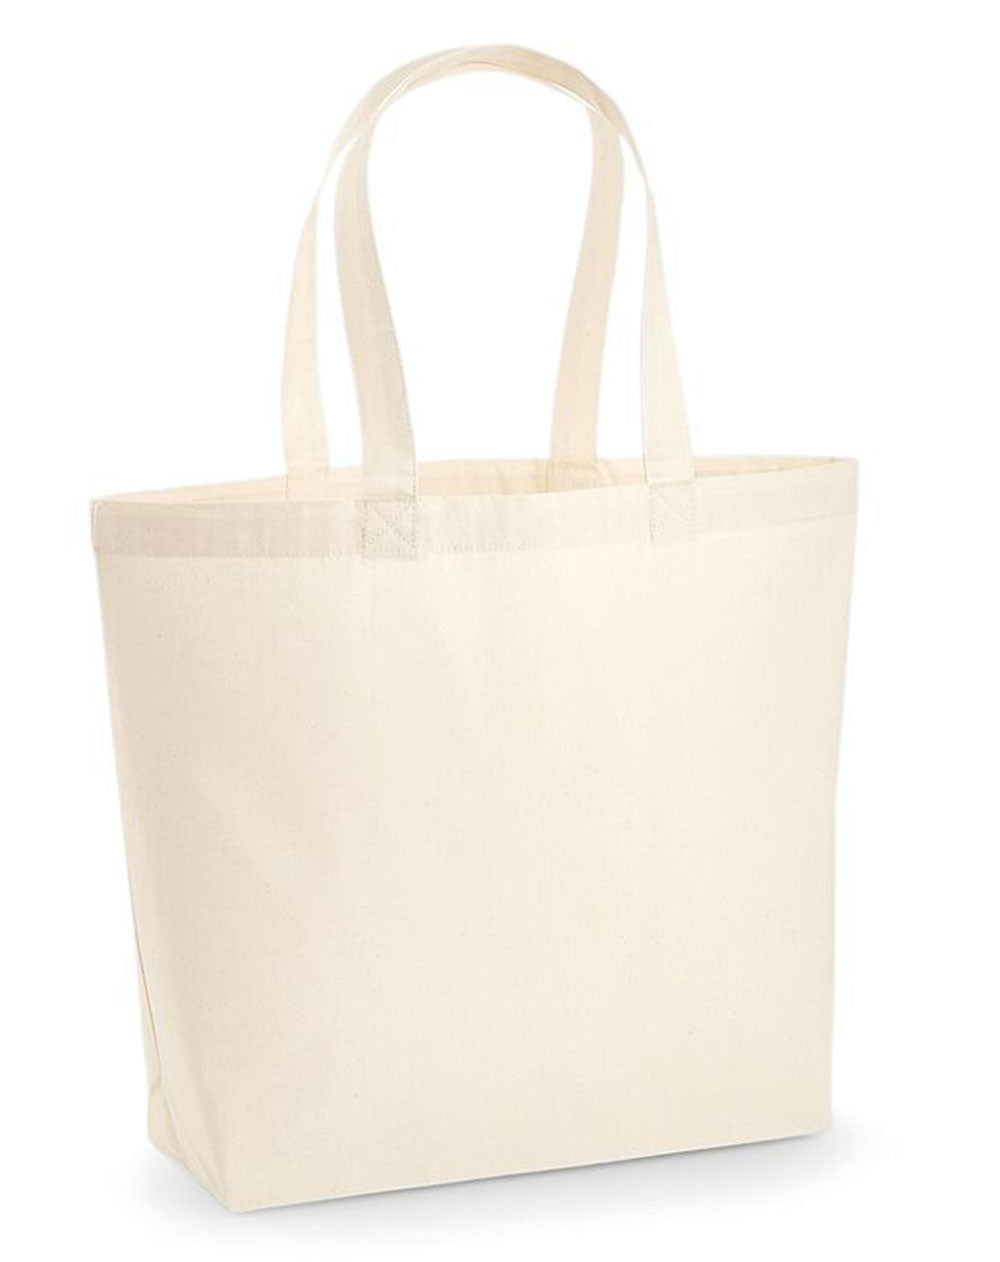 Pink Independent woman lip tote bag in cream